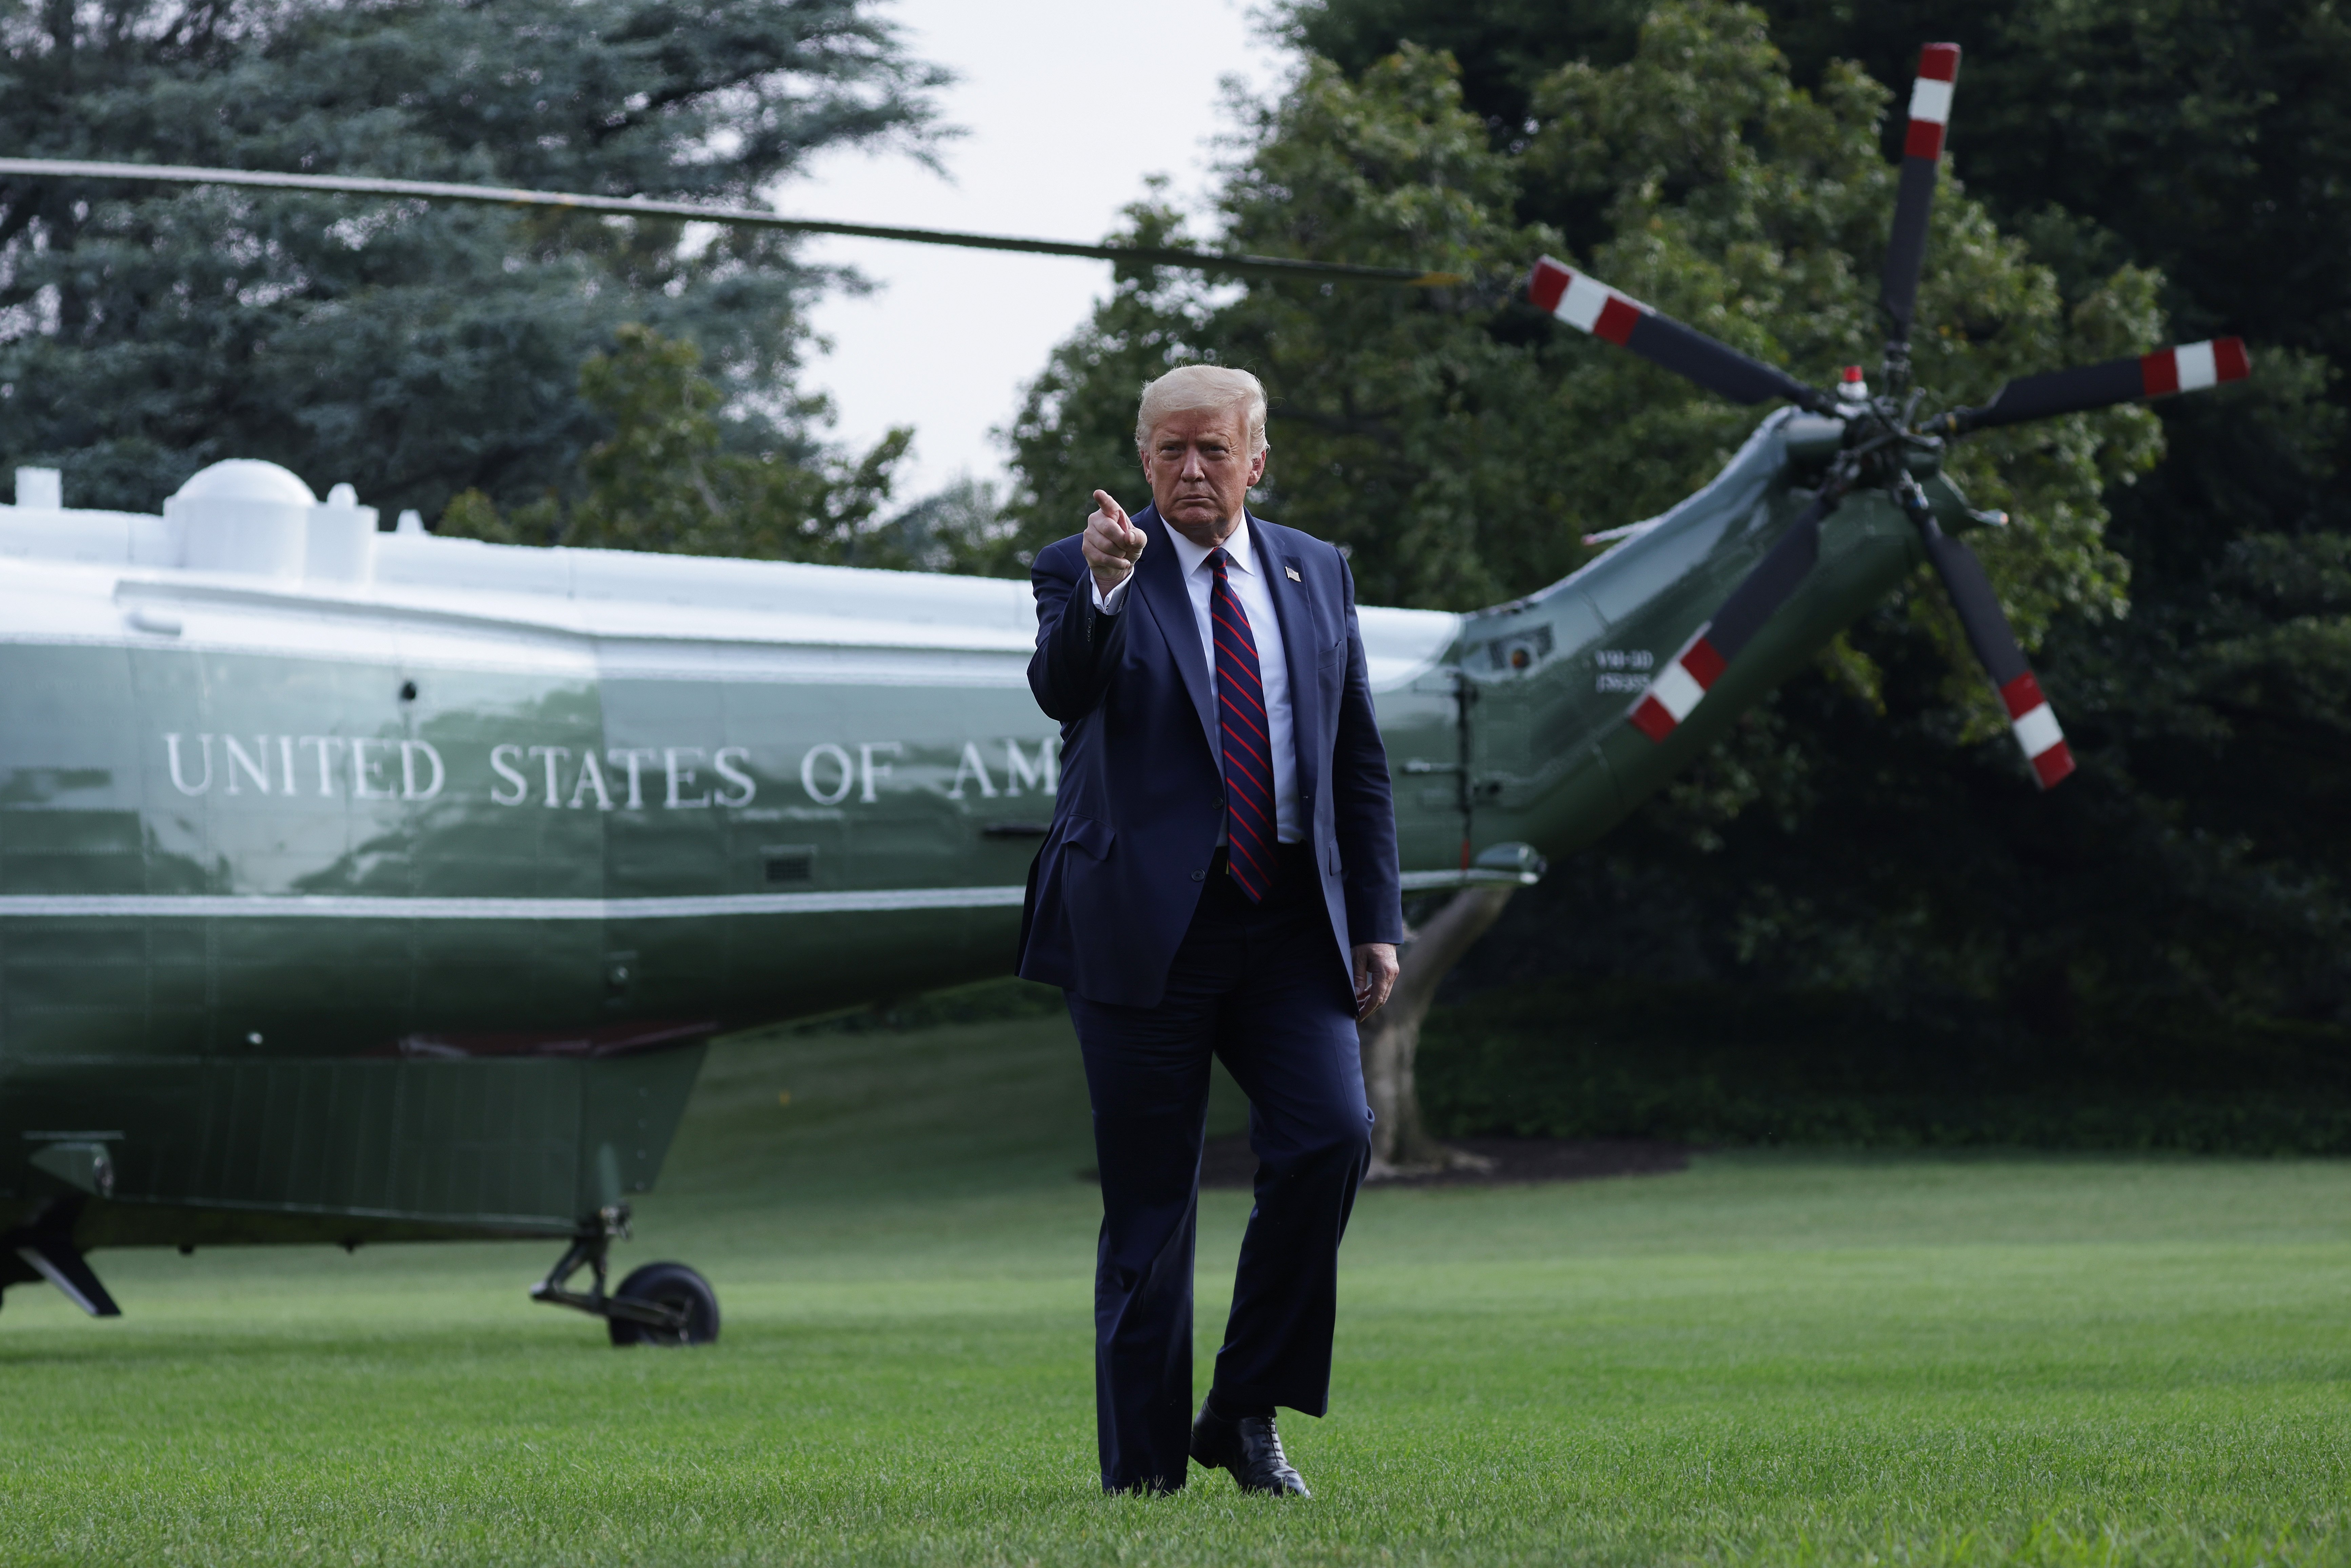 WASHINGTON, DC - JULY 27: U.S. President Donald Trump walks on the South Lawn after he landing aboard Marine One at the White House July 27, 2020 in Washington, DC. Trump was returning from a visit to the FUJIFILM Diosynth Biotechnologies' Innovation Center in Morrisville, North Carolina, a facility that supports manufacturing of "key components of the COVID-19 vaccine candidate" developed by Novavax. (Photo by Alex Wong/Getty Images)